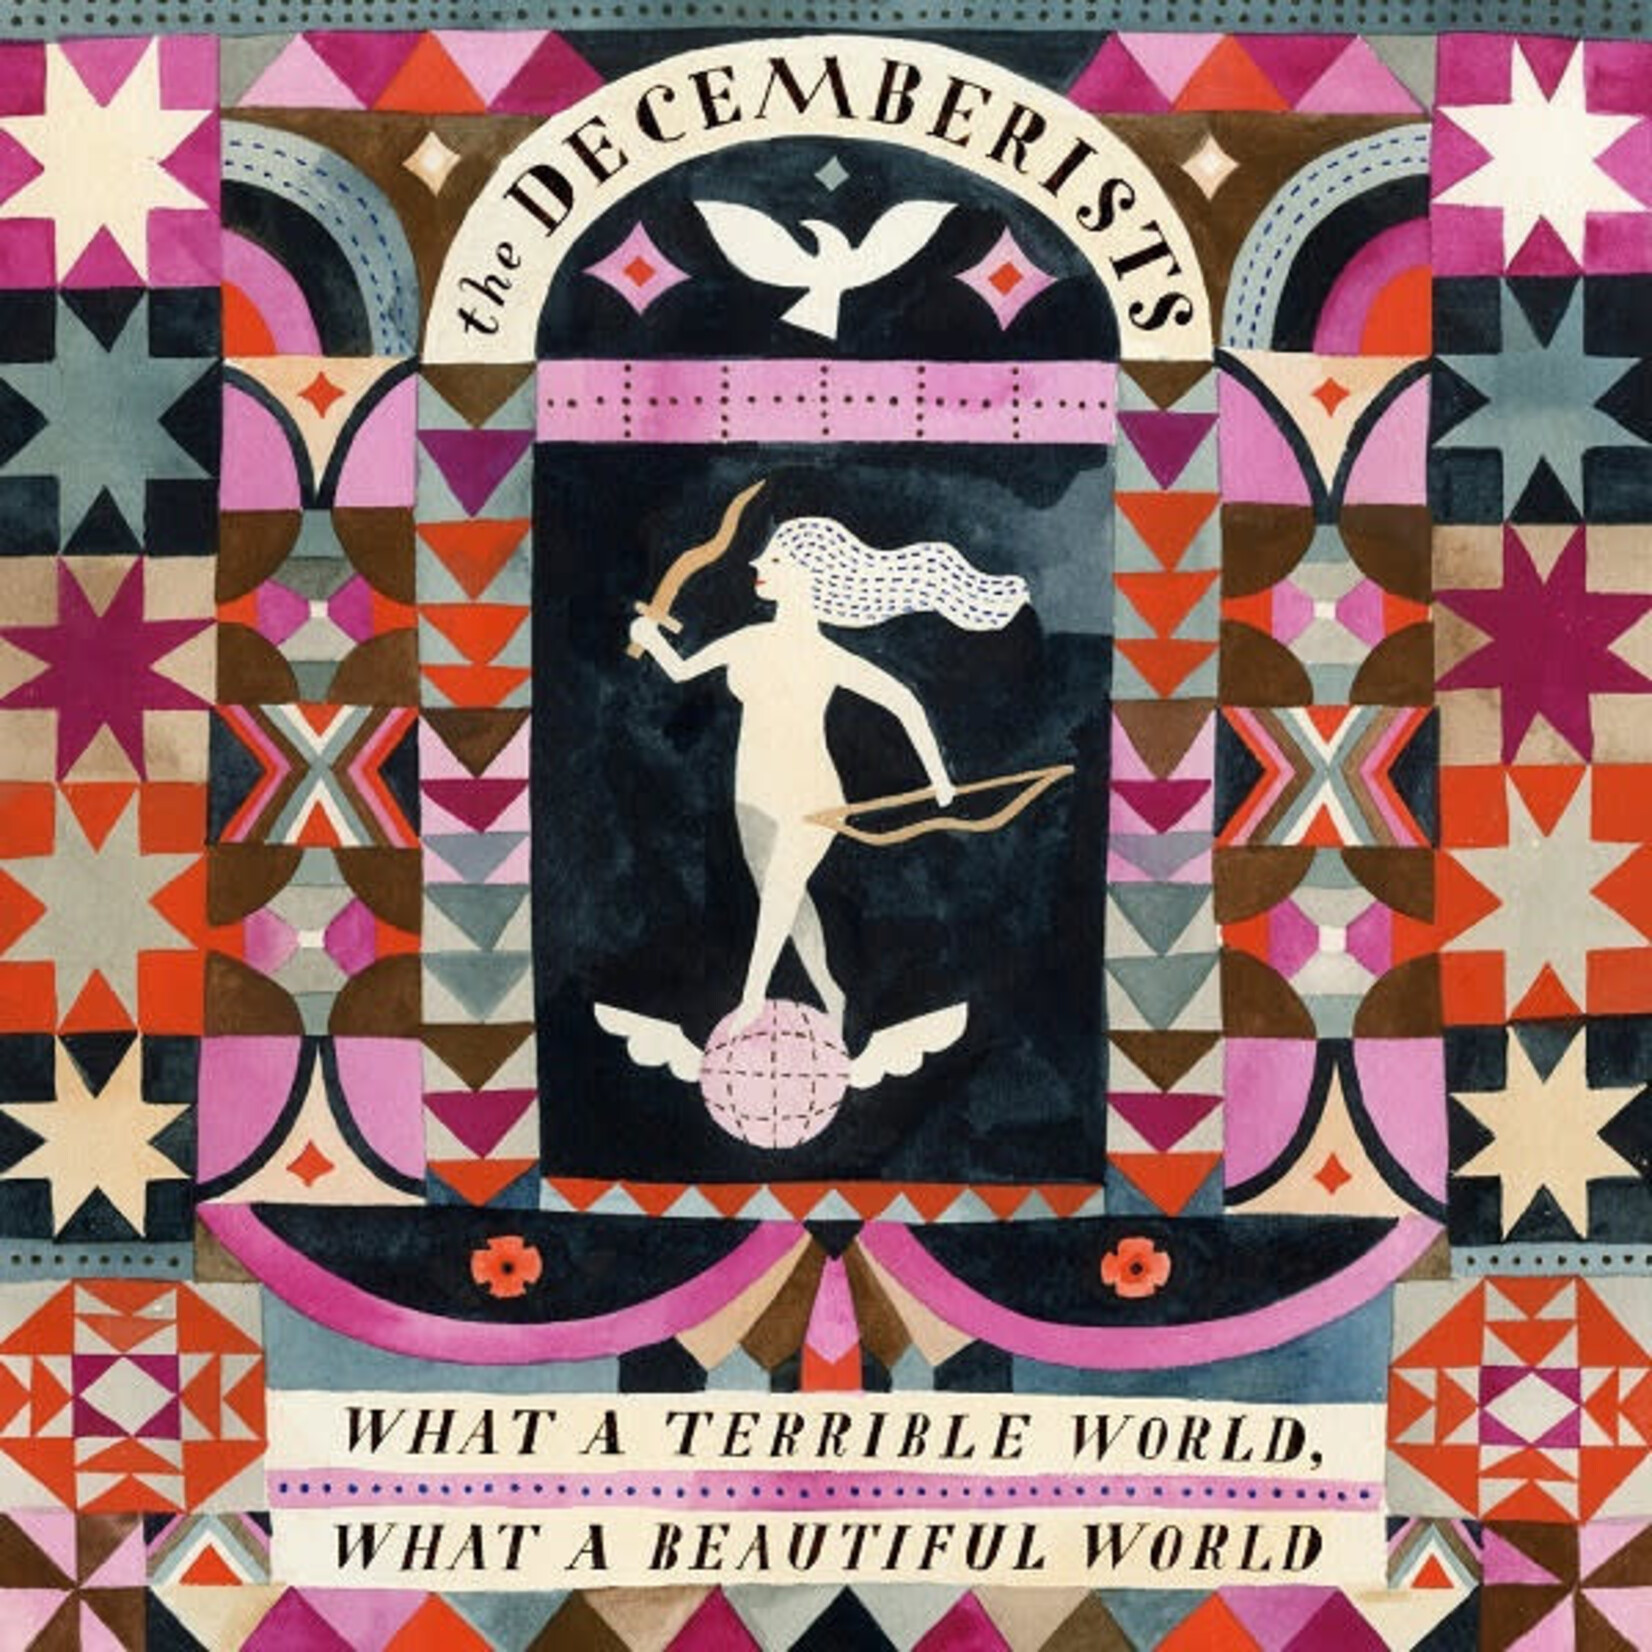 Capitol Decemberists - What A Terrible World, What A Beautiful World (2LP)